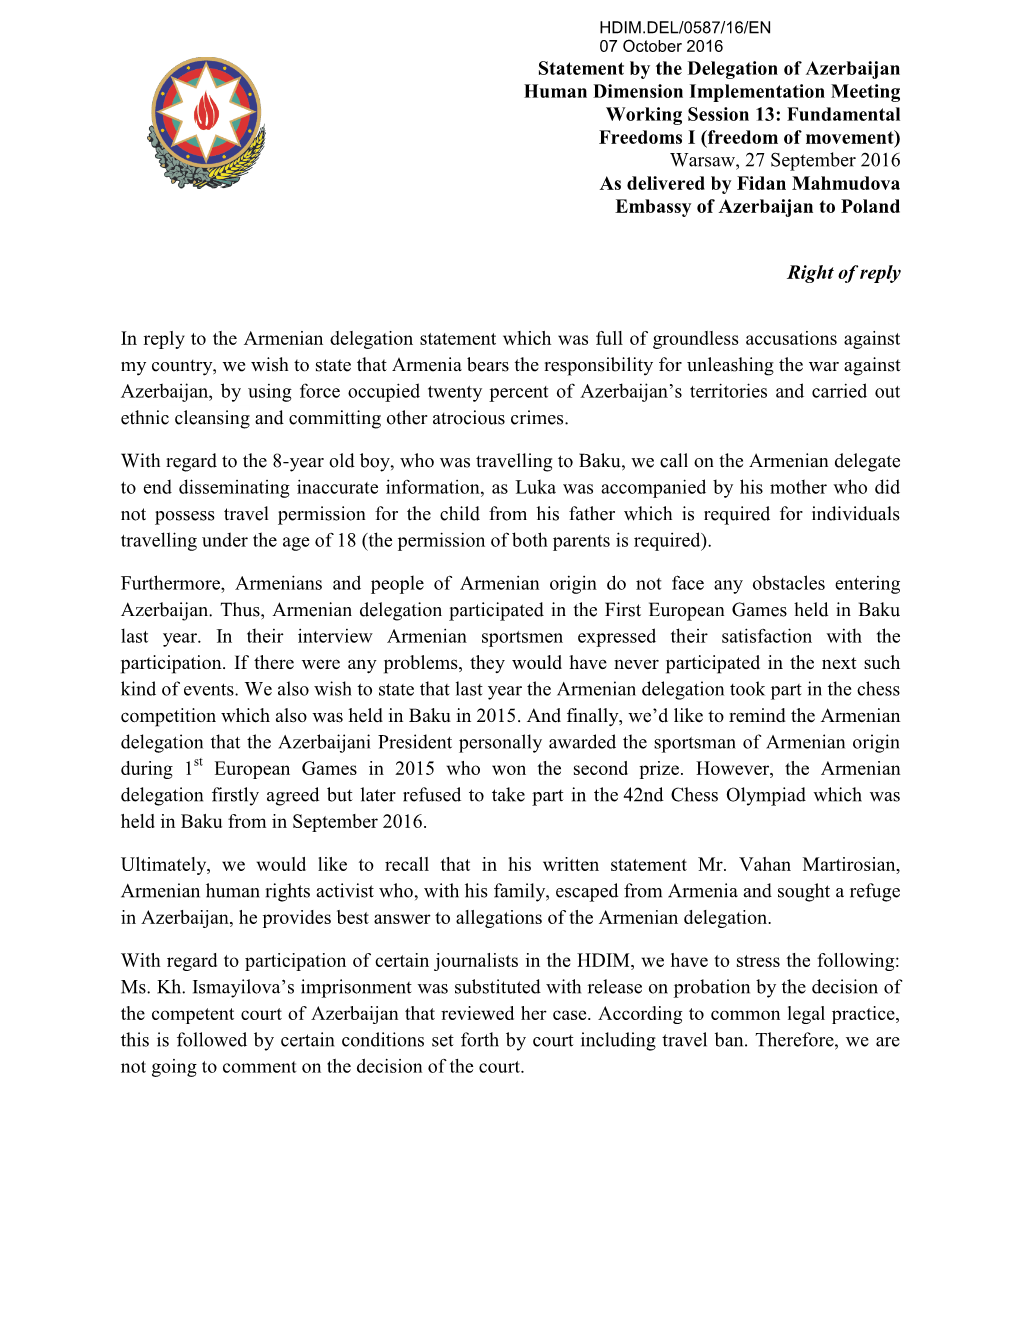 Right of Reply in Reply to the Armenian Delegation Statement Which Was Full